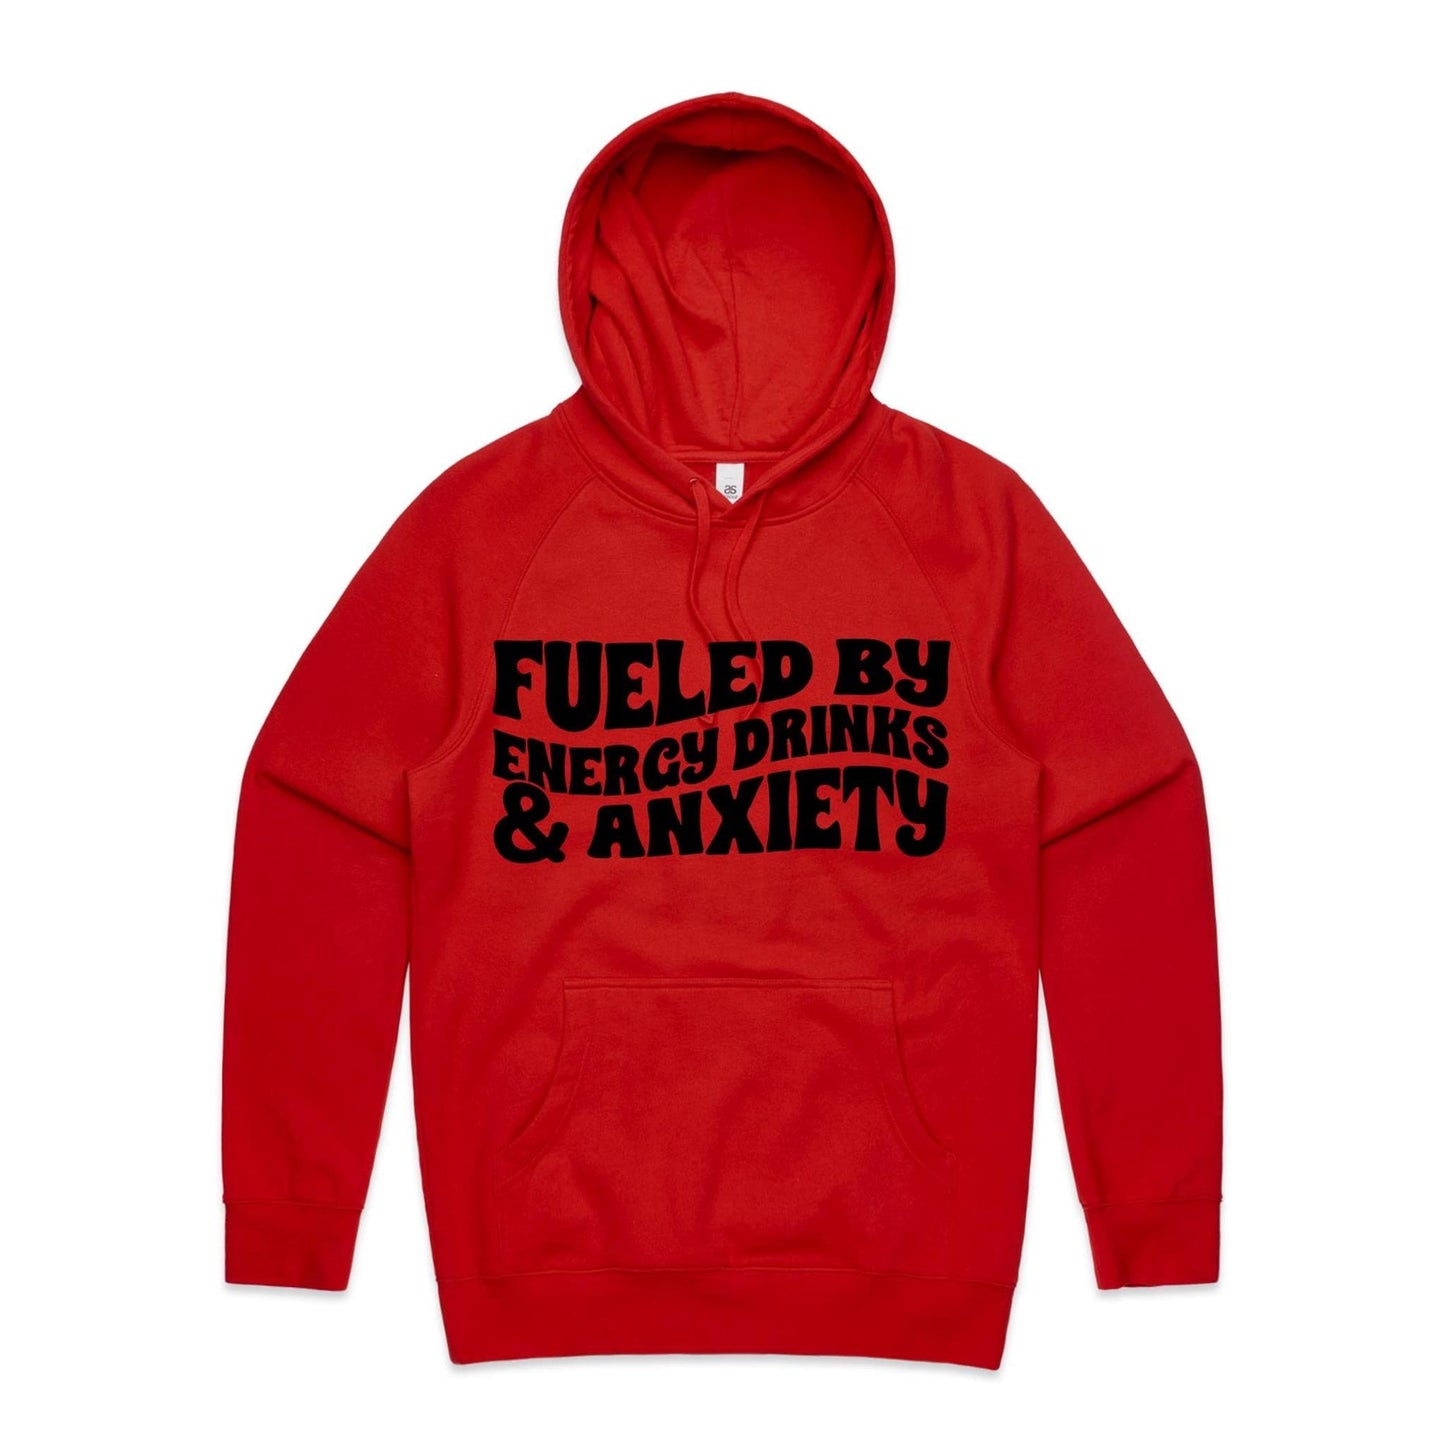 Unisex Hoodie - Fueled by Energy Drinks and Anxiety